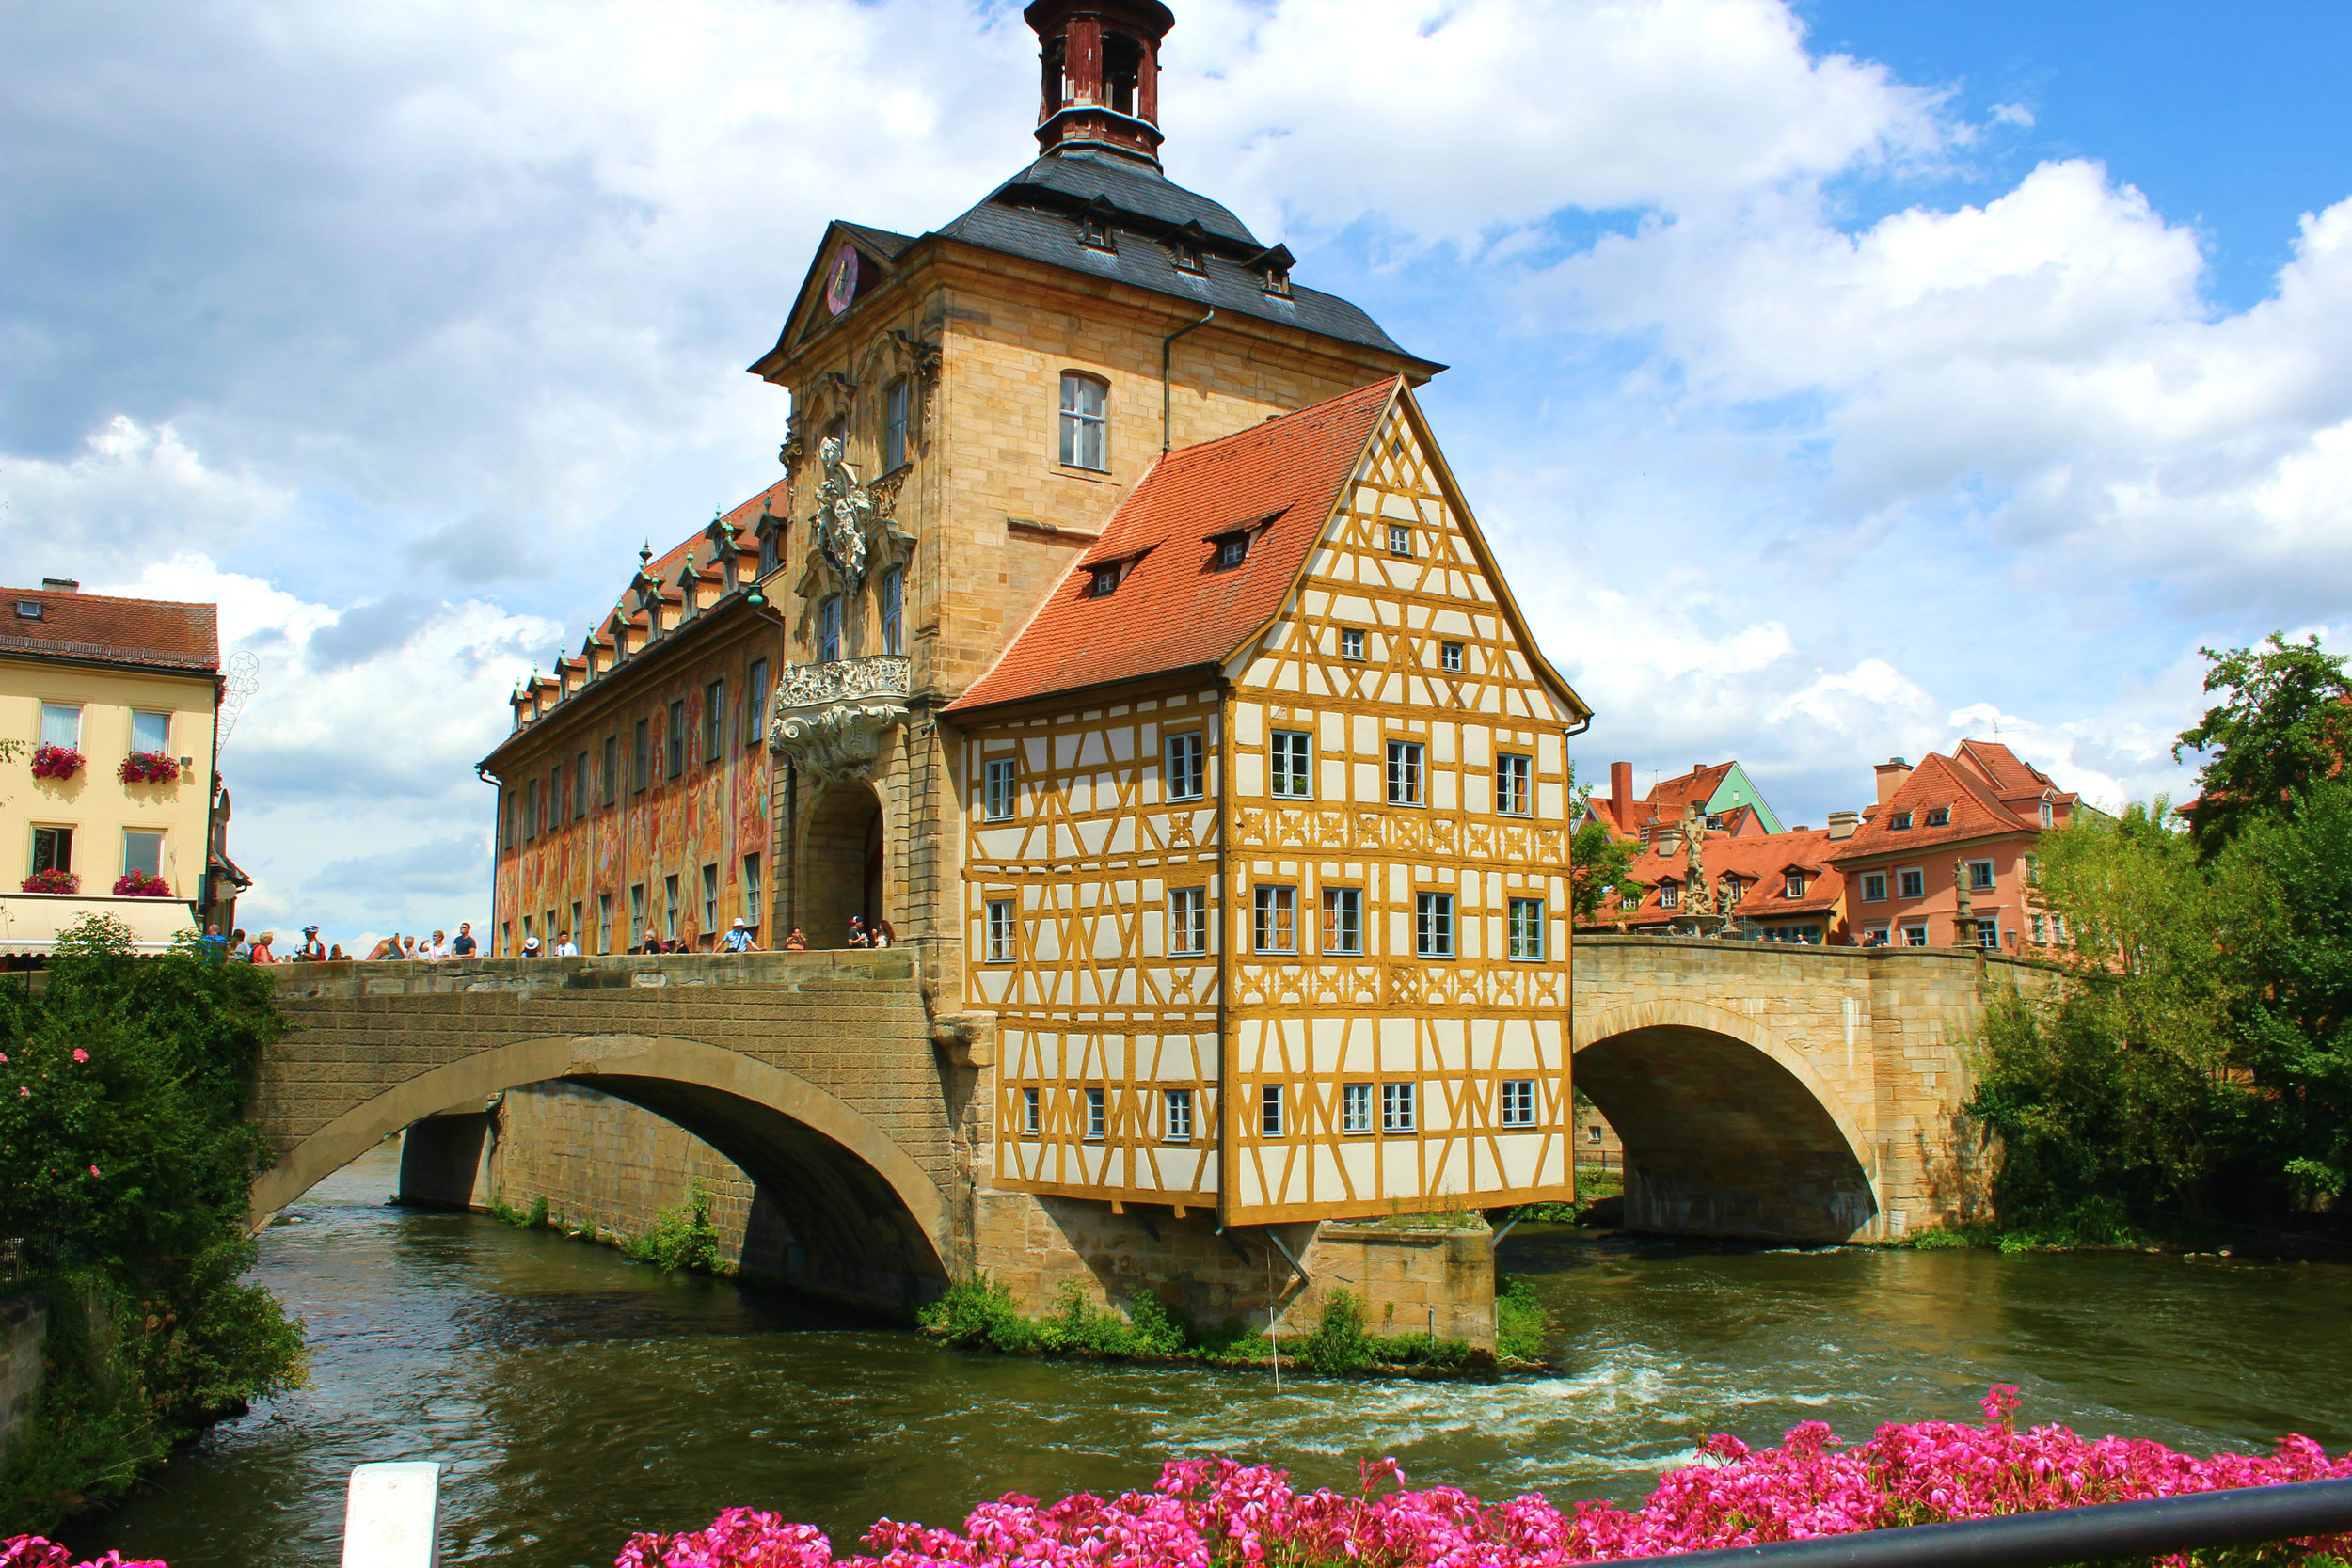 The Romantic Road and Bamberg, Germany